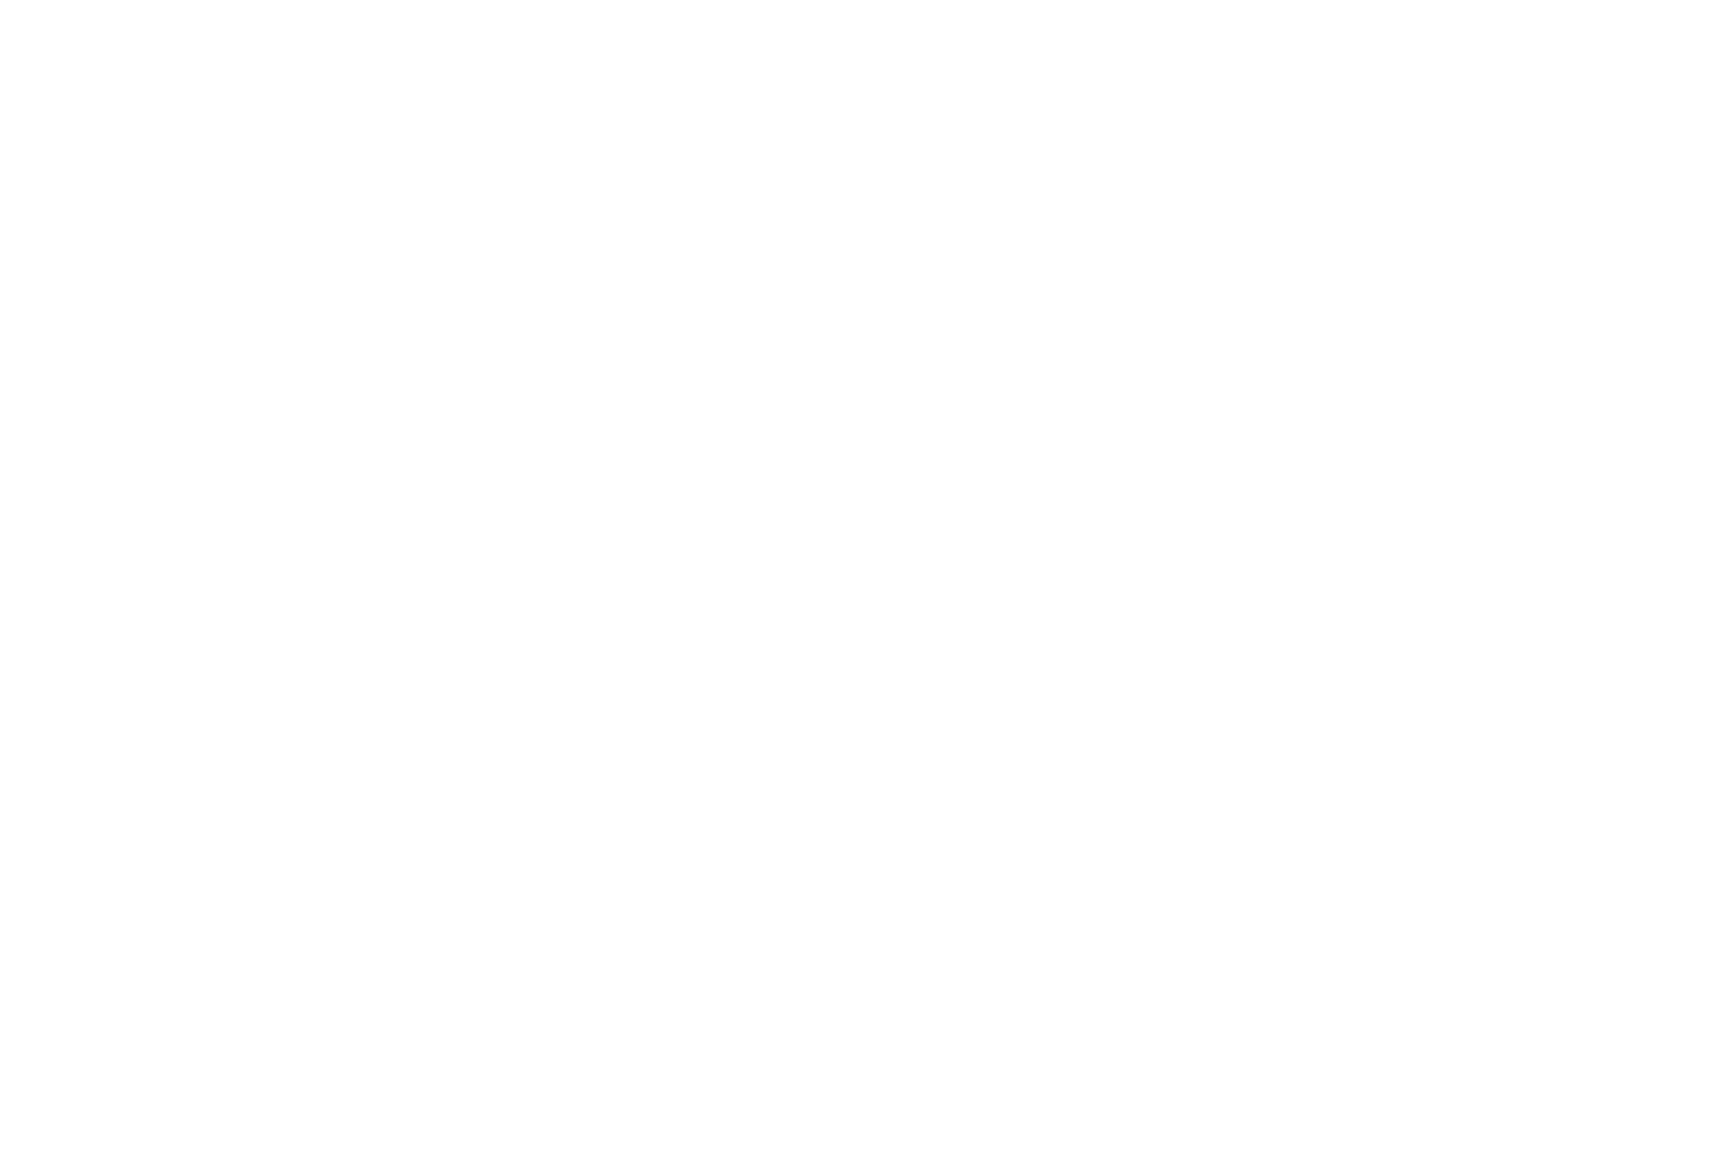 WINNER - BEST DIRECTOR 2016 - OUCHY FILM AWARDS 2016.png